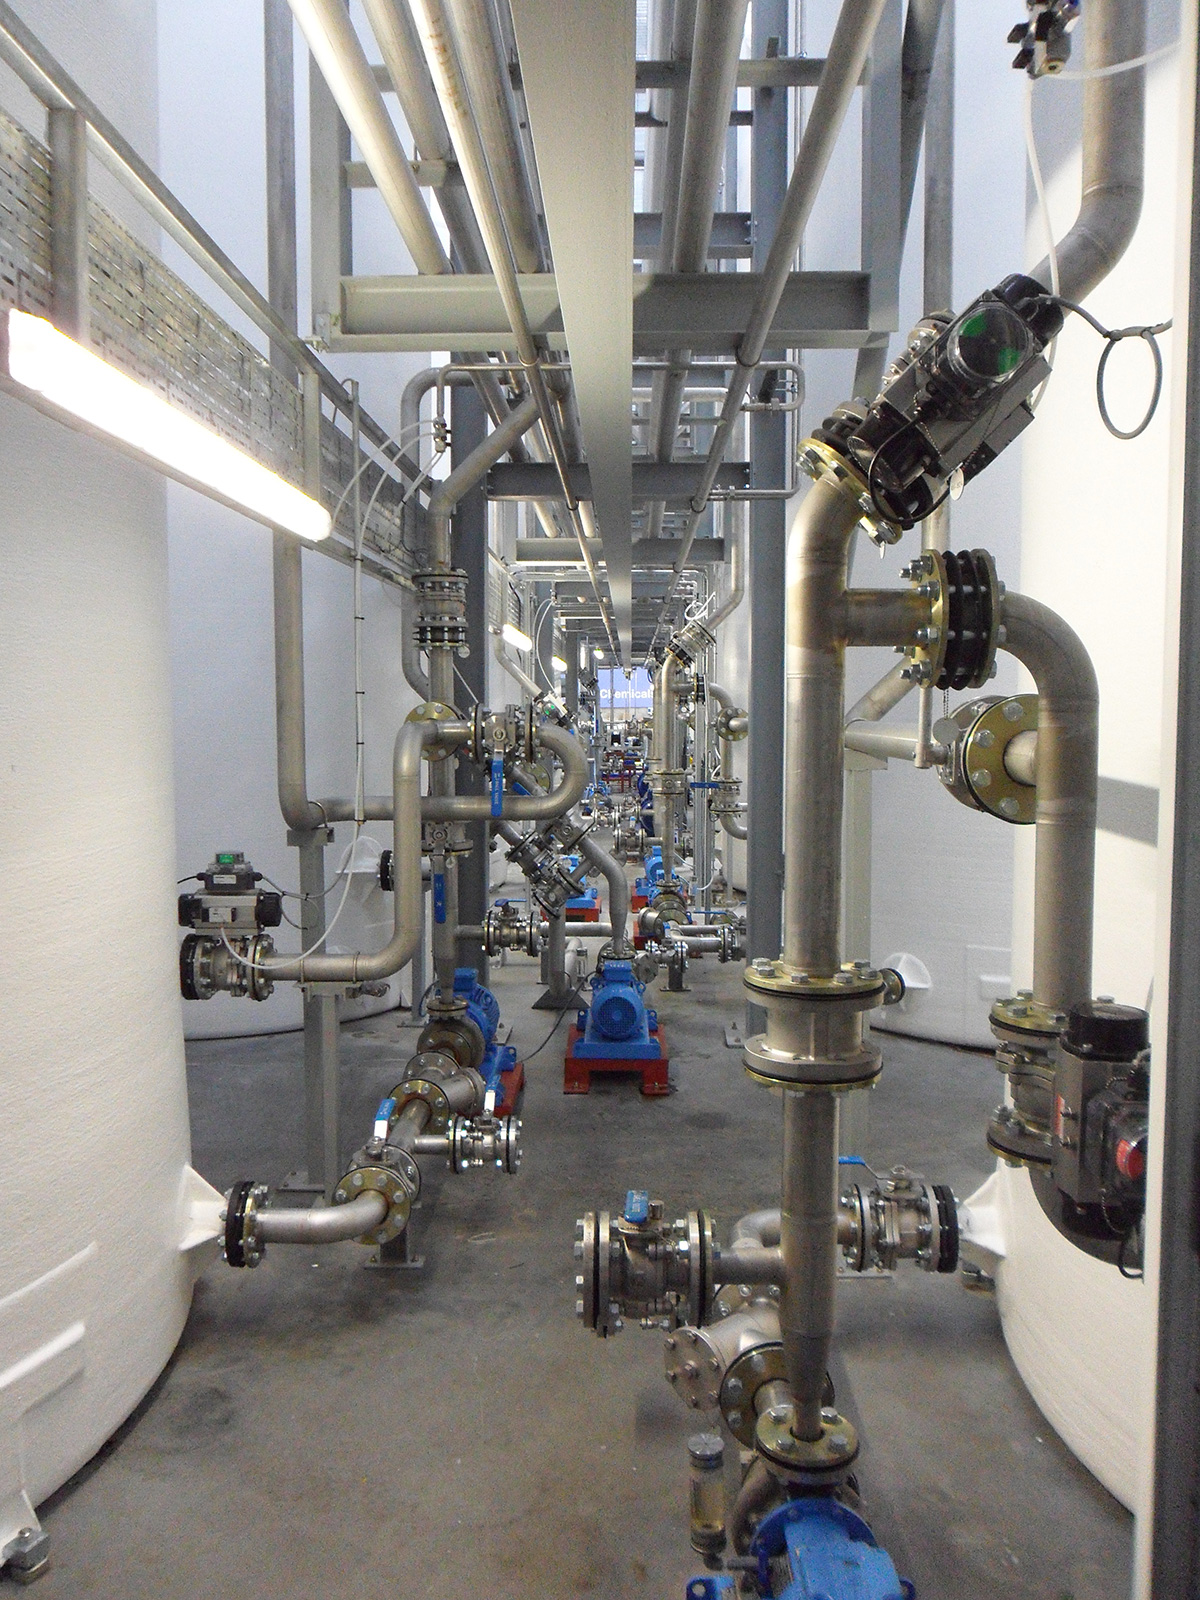 Additional view of assortment of pipework and product transfer pumps